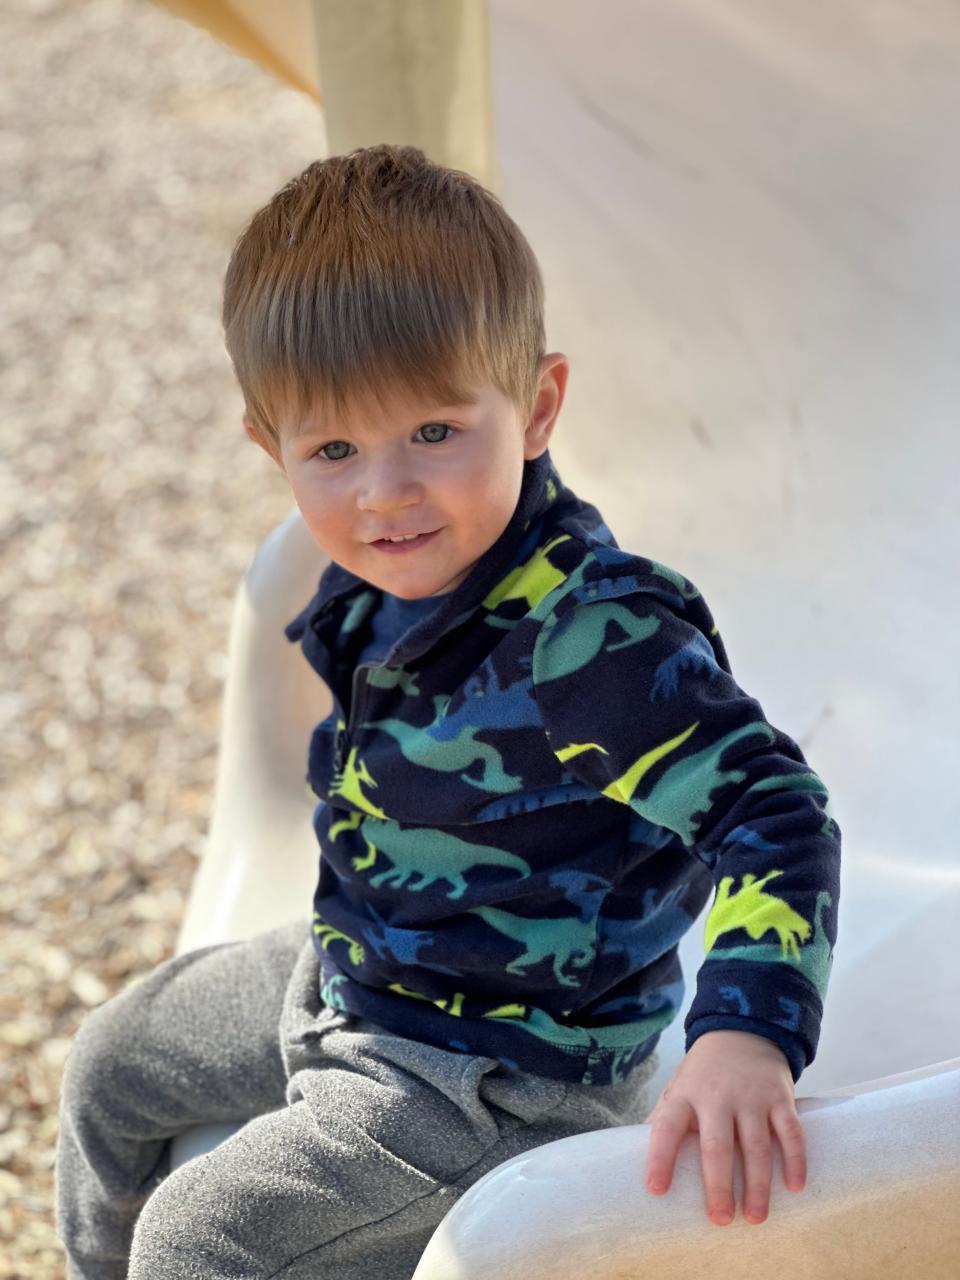 Sutton Eggeman, 2, was the subject of a statewide Amber Alert after the pickup truck he was sleeping in was stolen from outside a Dollar General store in Marshallville in northeast Ohio. The male suspect was later arrested in Akron and the boy was recovered safely.